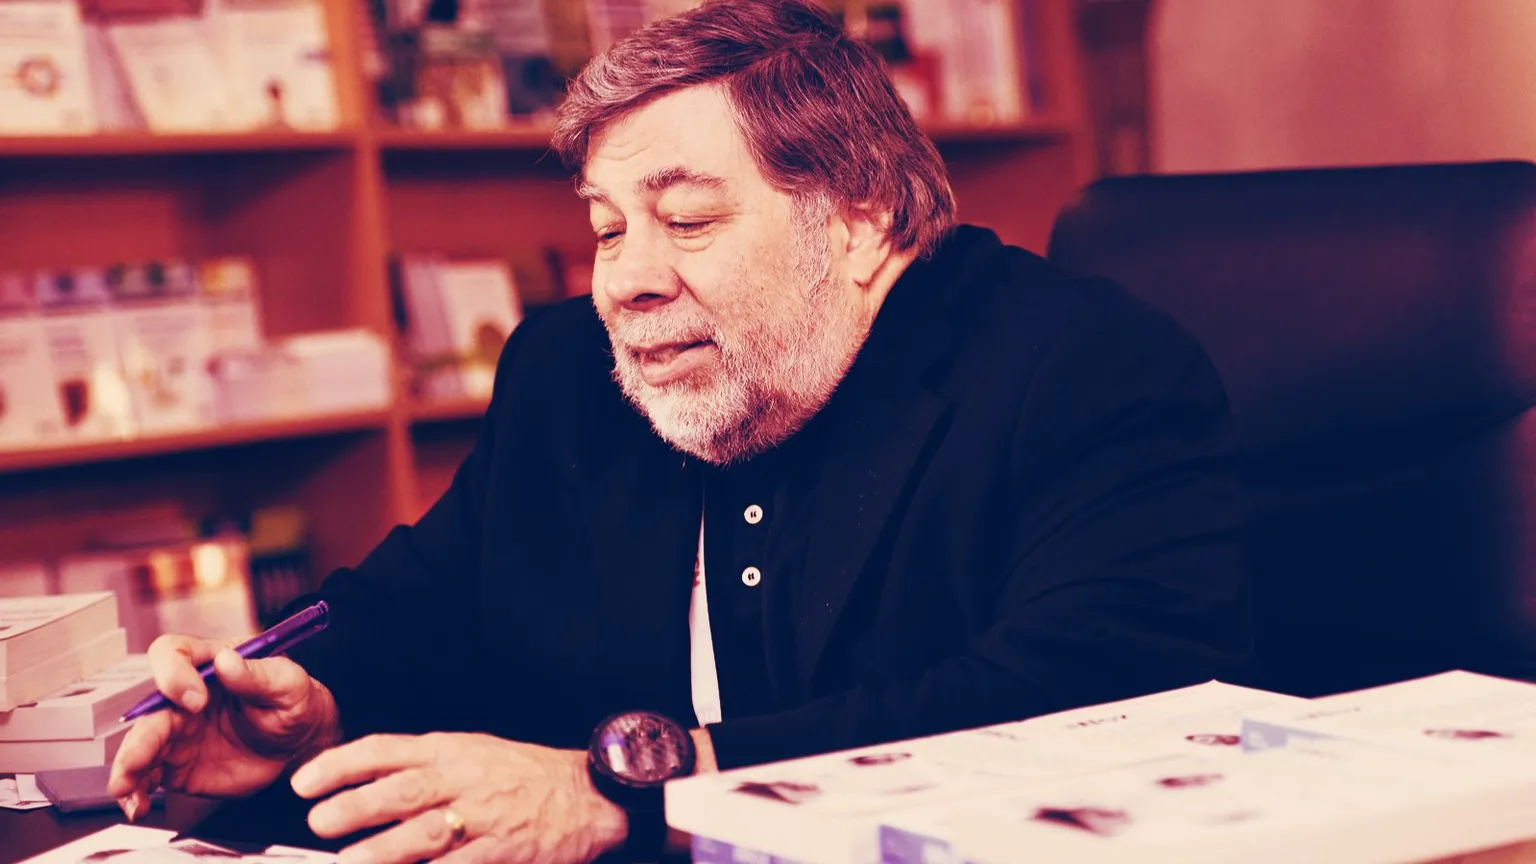 Steve Wozniak, co-founder Apple, at a conference in 2014 in Milan, Italy. Image: Shutterstock